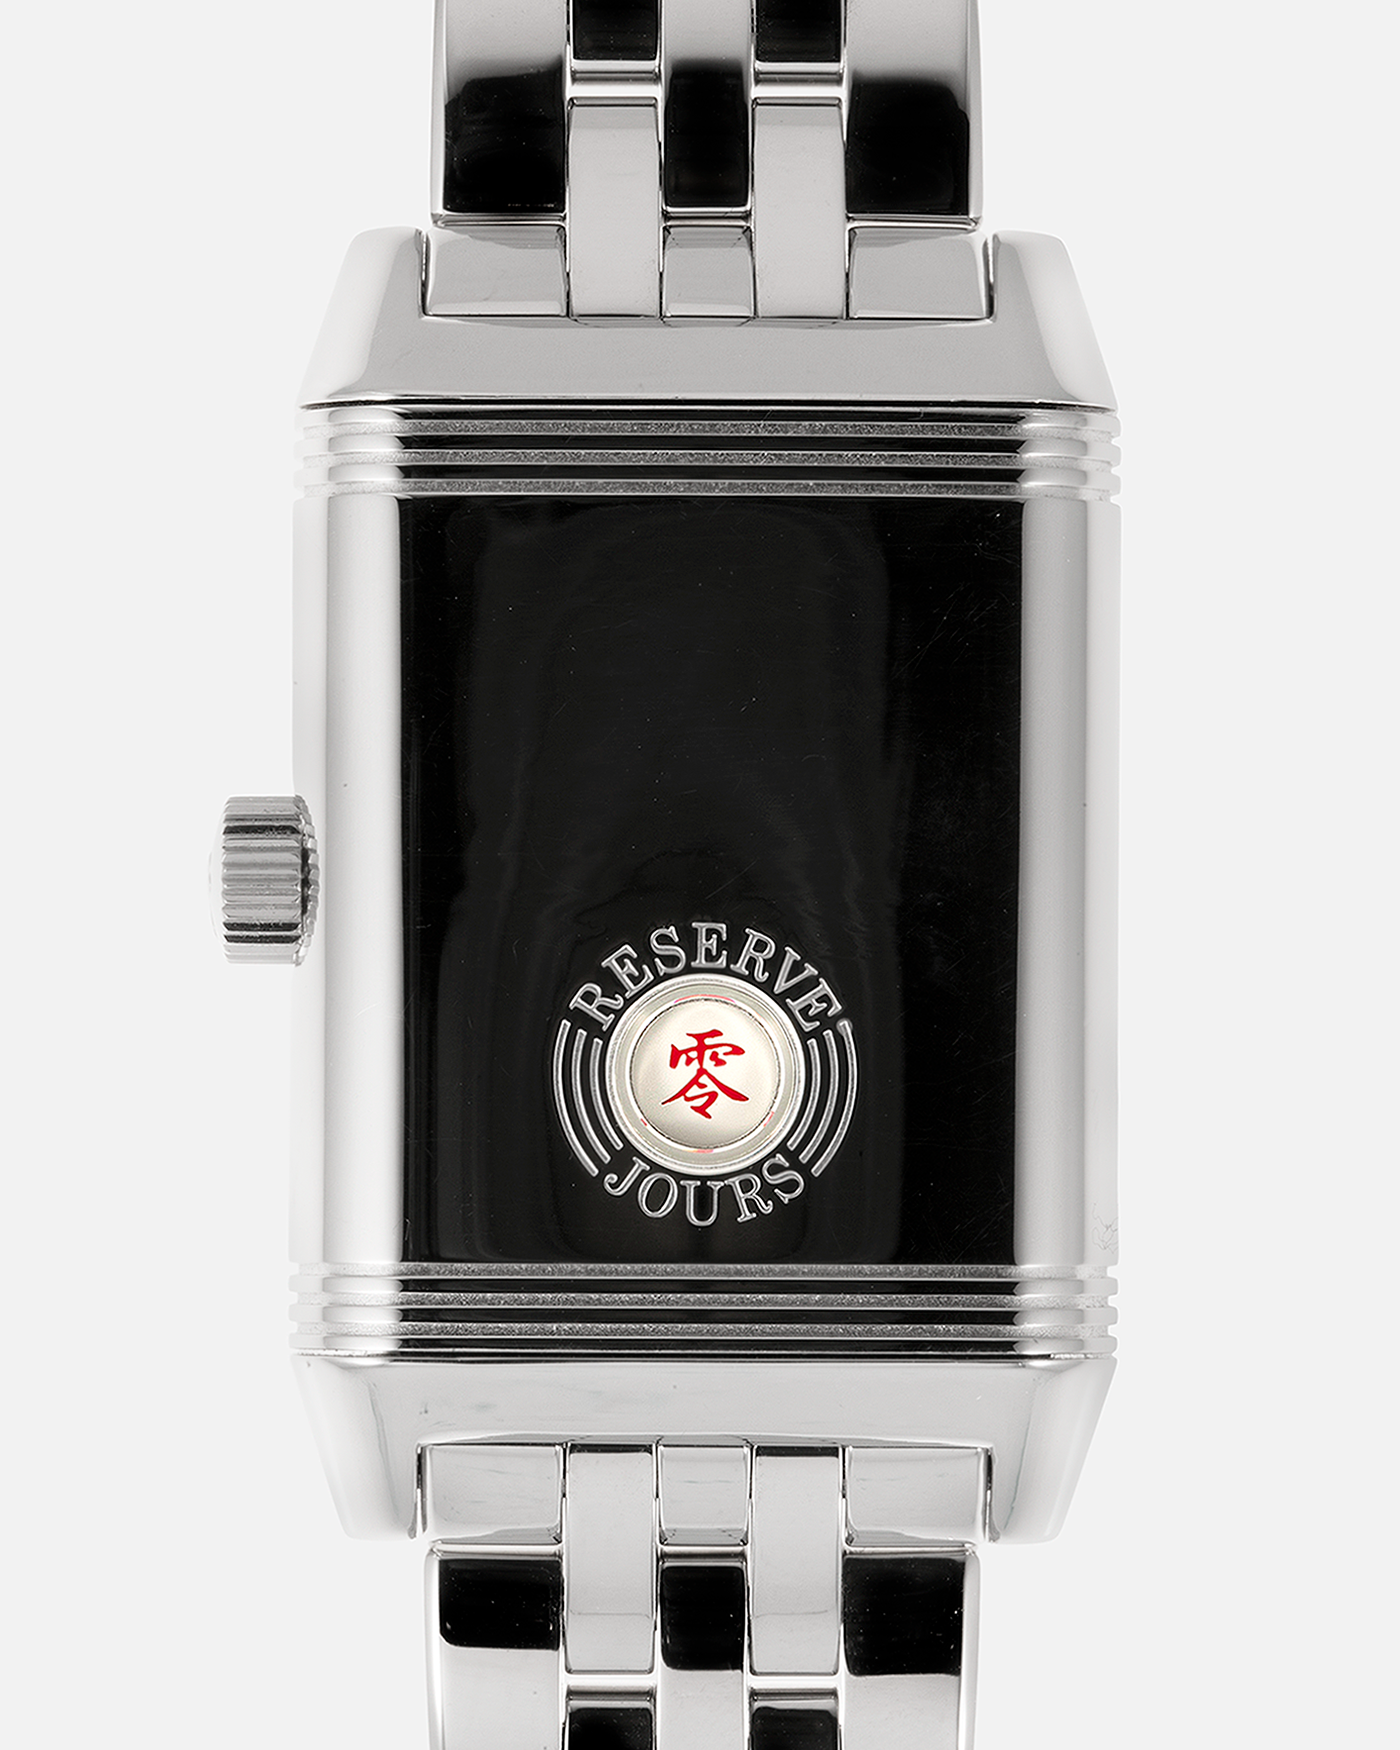 Brand: Jaeger LeCoultre Year: 2004 Model: Grande Reverso 8 Days Kanji Japan Edition, Limited to 50 pieces Reference: 240.8.14 Material: Stainless Steel Movement: JLC Cal. 874, Manual-Wind Case Diameter: 46.5mm x 29mm Bracelet/Strap: Jaeger LeCoultre Stainless Steel Bracelet with Signed Deployant Clasp